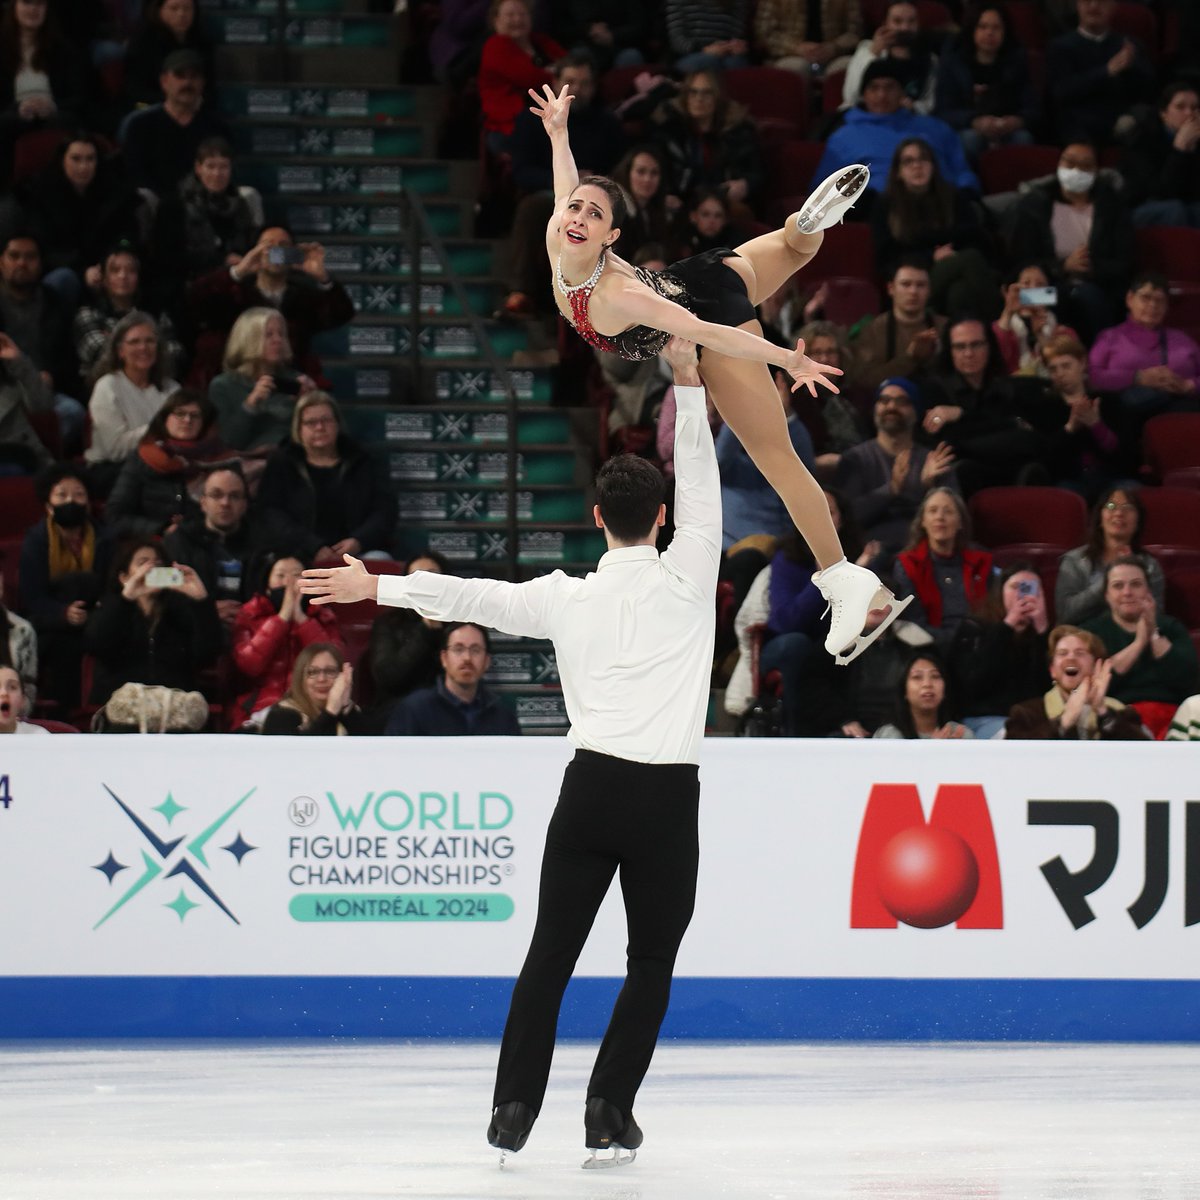 A petition has been started to support #WorldFigure pairs champion Deanna Stellato-Dudek in her application for Canadian citizenship so that she and partner Maxime Deschamps can compete at the #MilanoCortina2026 Olympics. 📝 change.org/p/give-deanna-… #FigureSkating